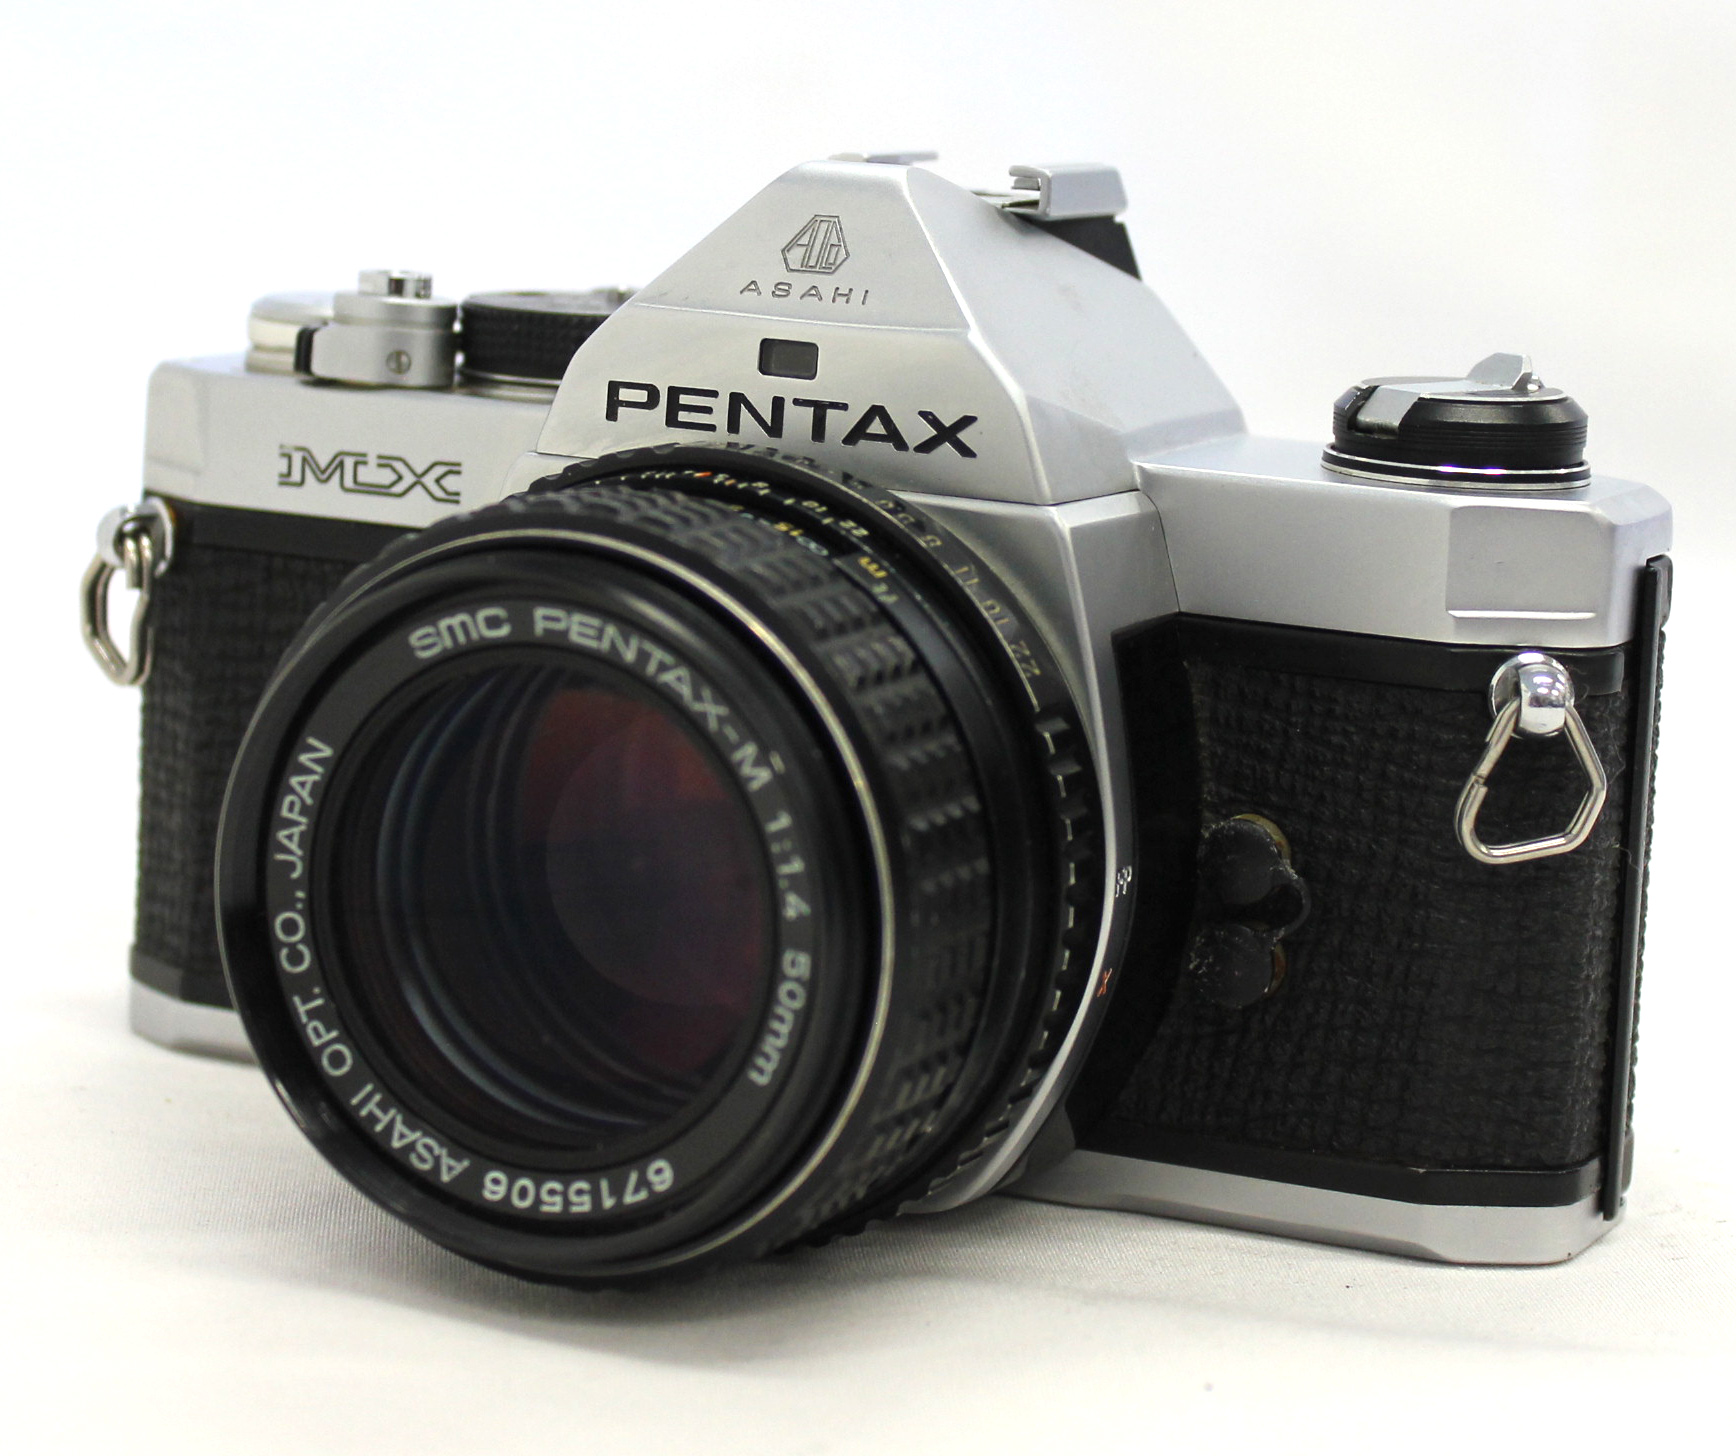 Japan Used Camera Shop | [Excellent++++] Pentax MX SLR 35mm Film Camera with SMC Pentax-M 50mm F/1.4 from Japan